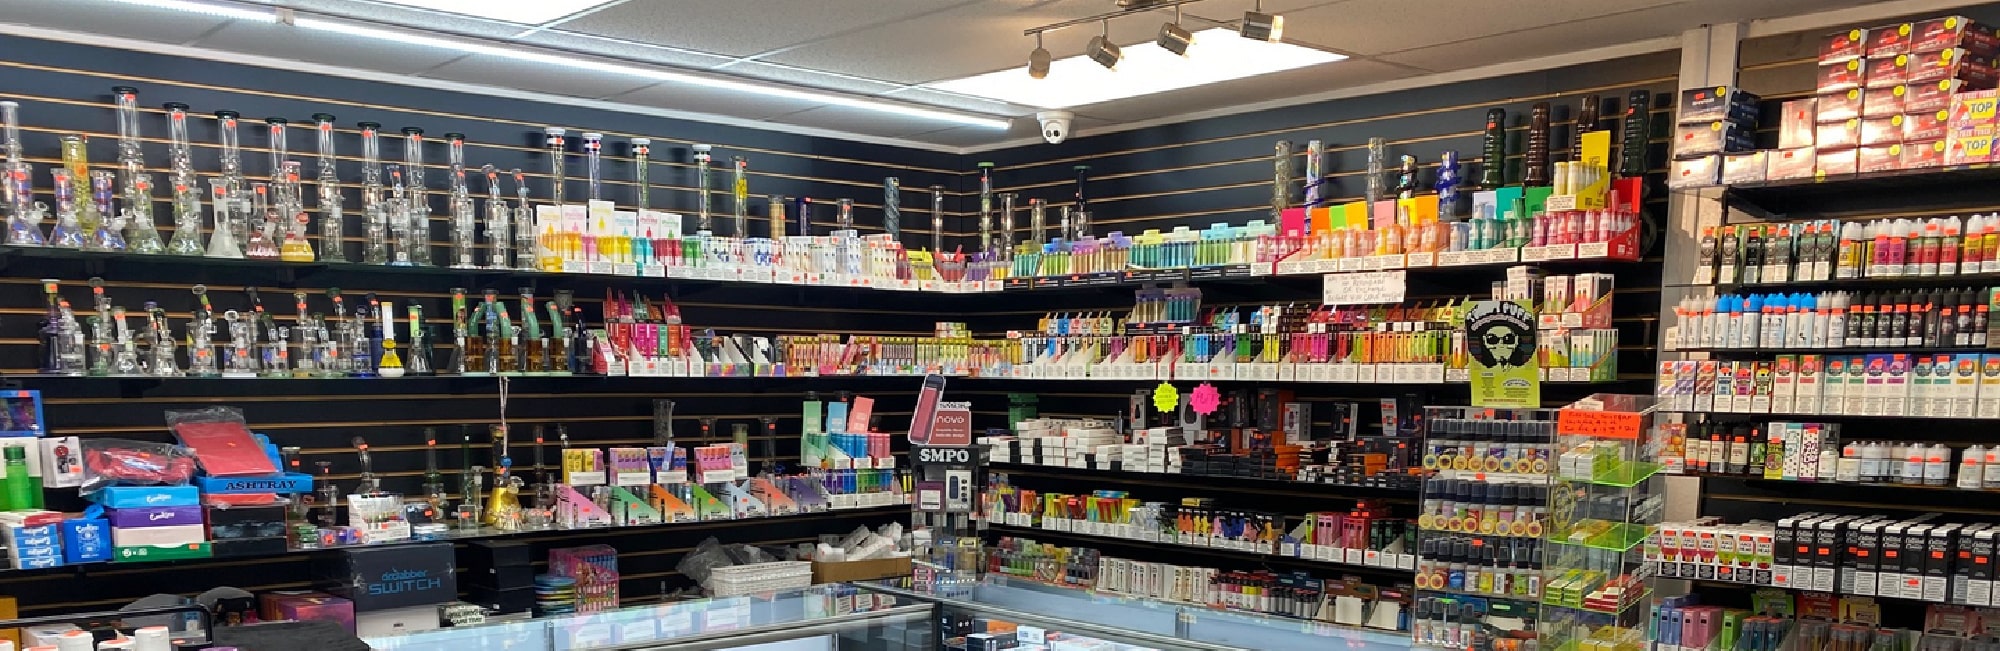 image of tobacco & vape in greenville nc